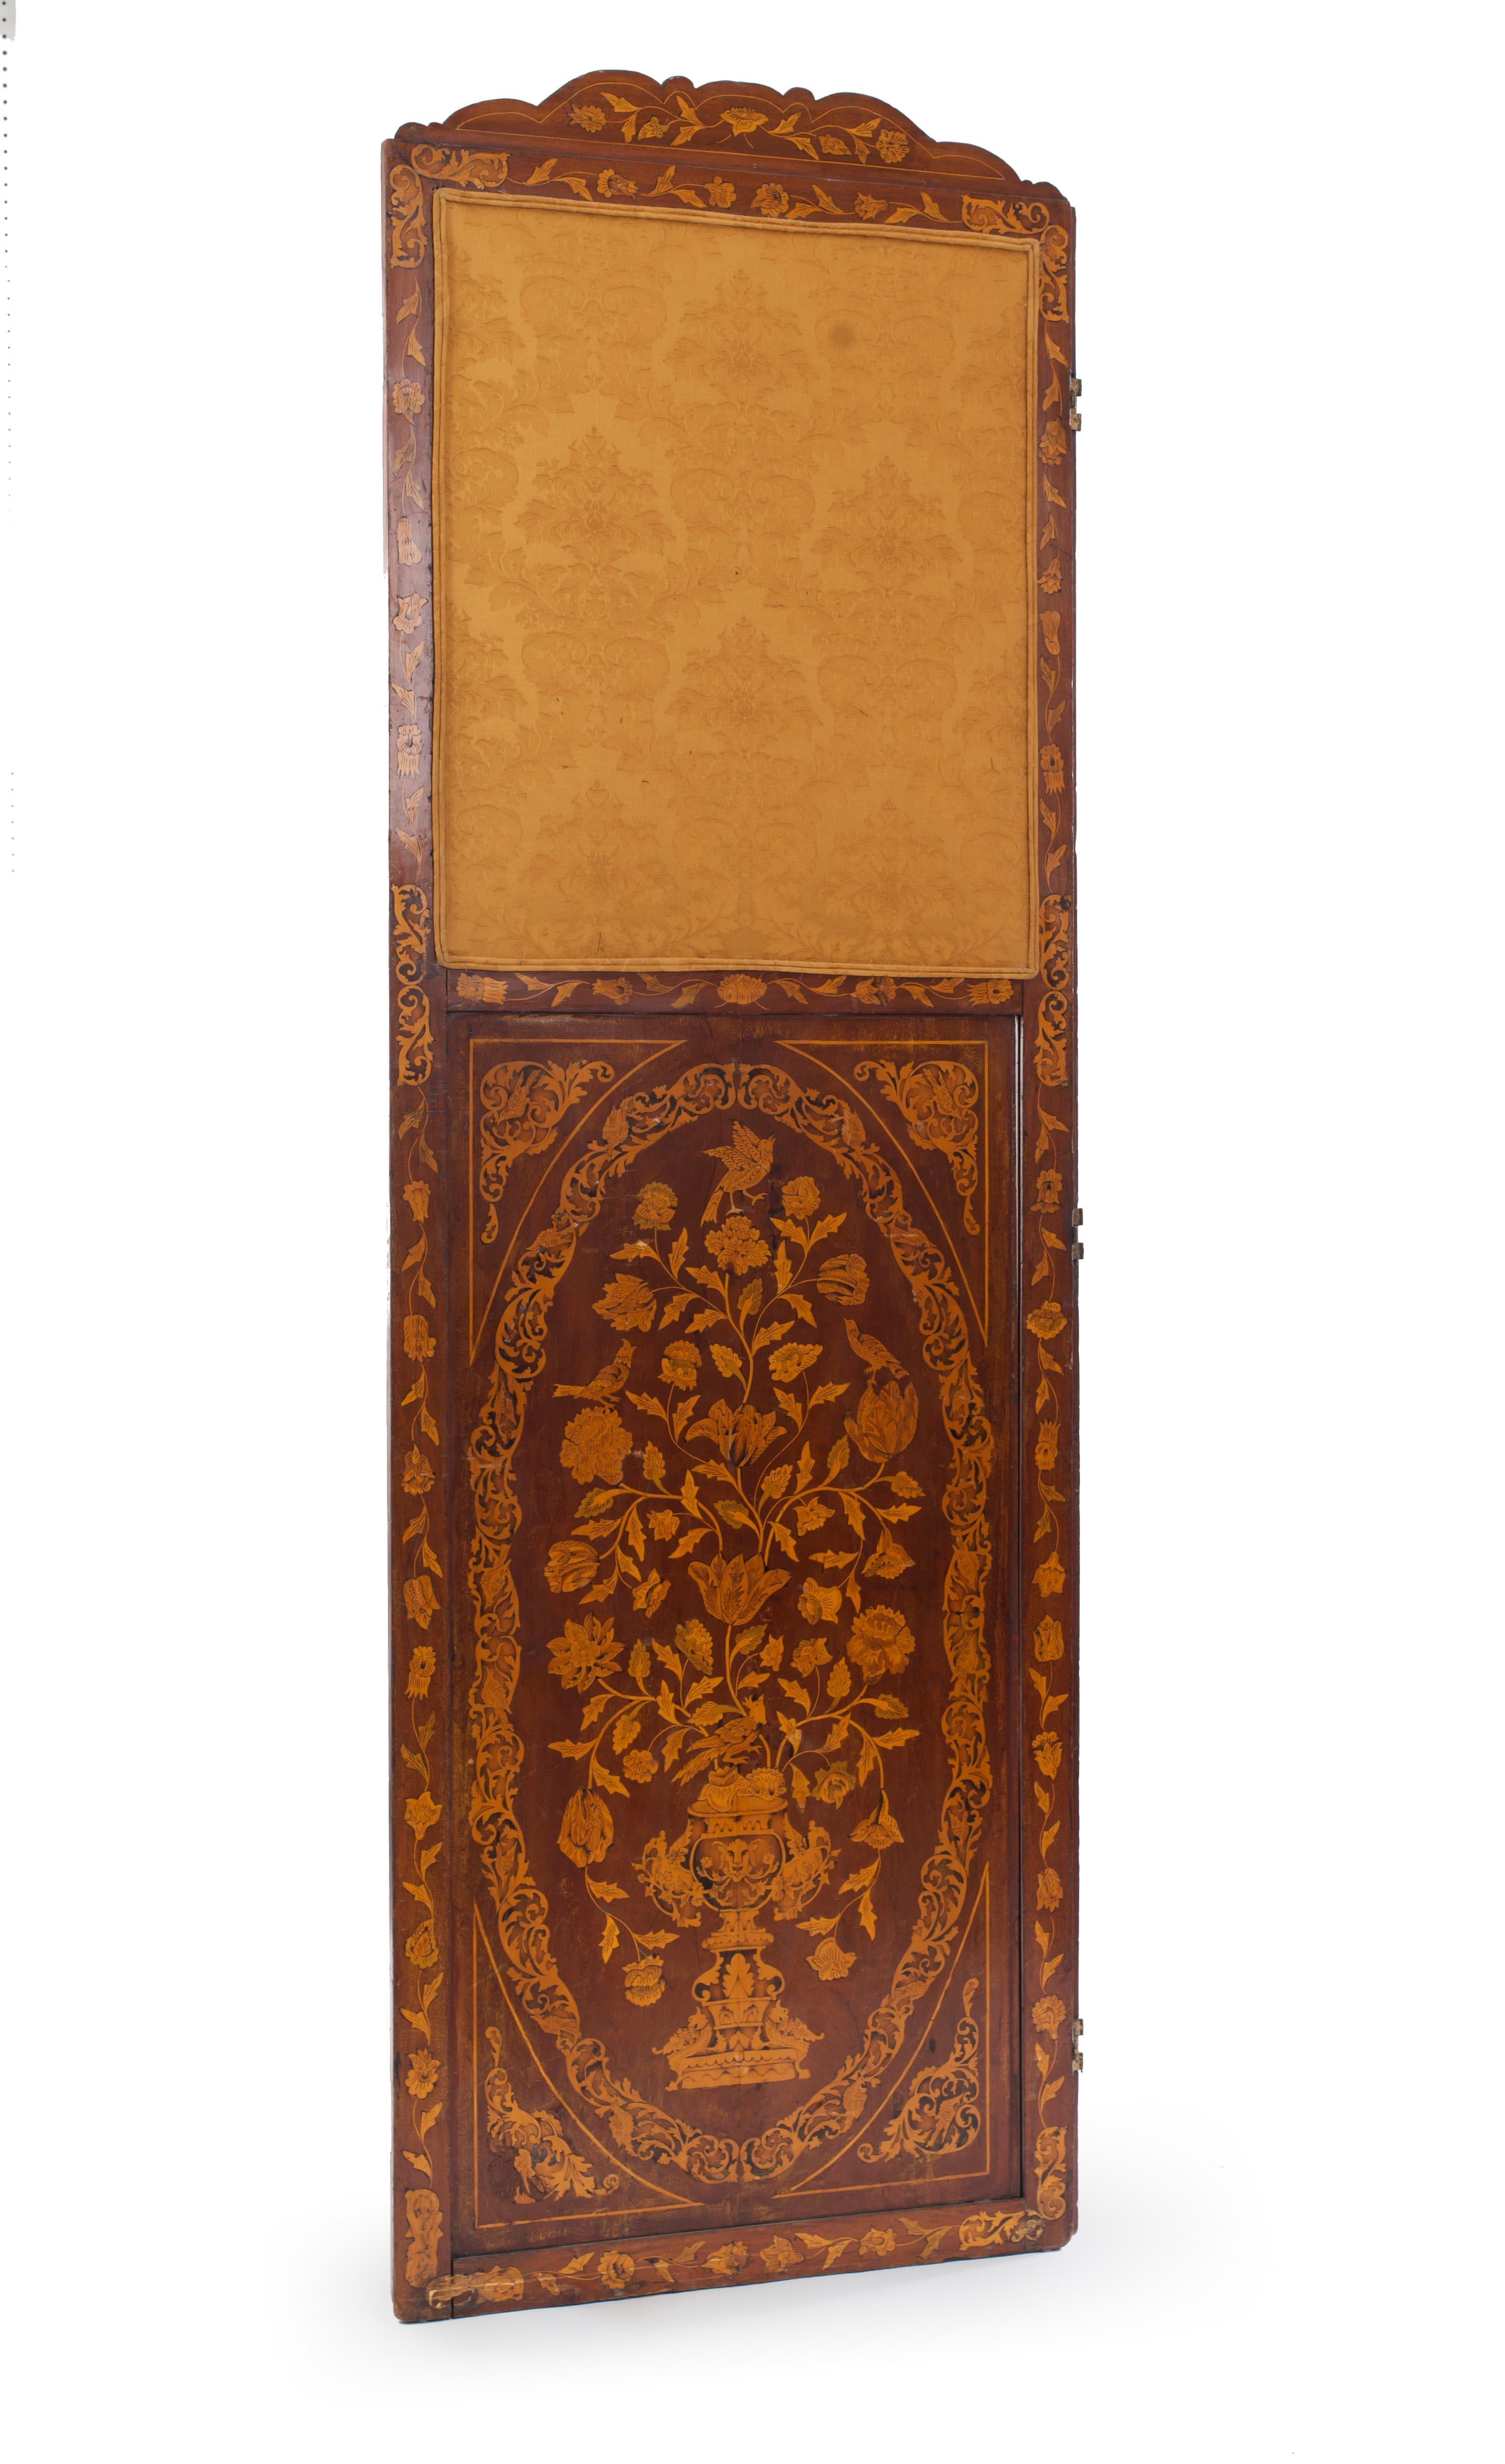 Continental Dutch style (19th century) mahogany and inlaid marquetry 4 fold screen with upholstered top panel with shaped crest at top.
     